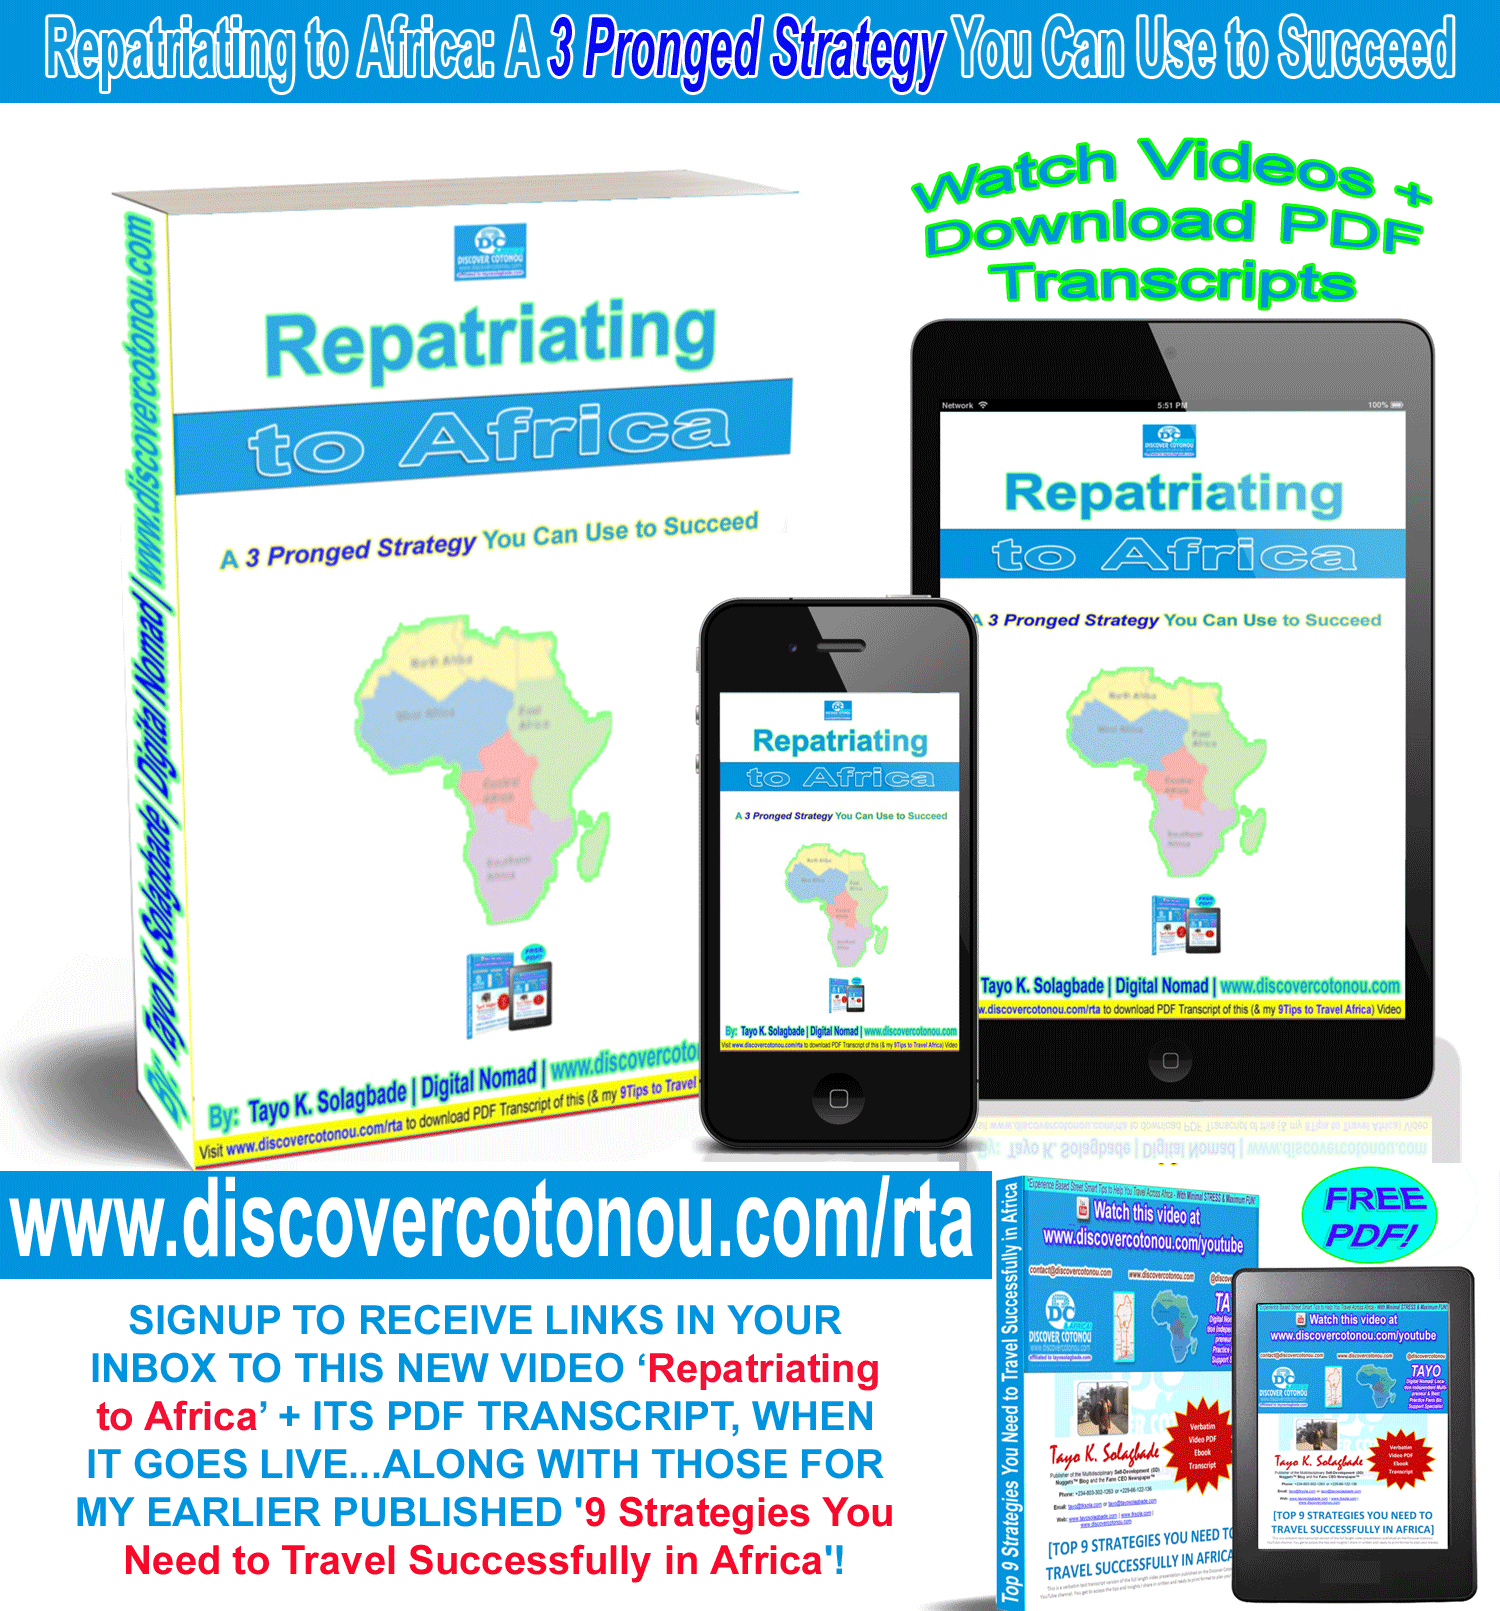 [COMING SOON] Repatriating to Africa: A 3 Pronged Strategy You Can Use to Succeed - SIGNUP ABOVE, TO RECEIVE LINKS IN YOUR INBOX TO THIS NEW VIDEO + ITS PDF TRANSCRIPT WHEN IT GOES LIVE...ALONG WITH THOSE FOR MY EARLIER PUBLISHED '9 Strategies You Need to Travel Successfully in Africa'!